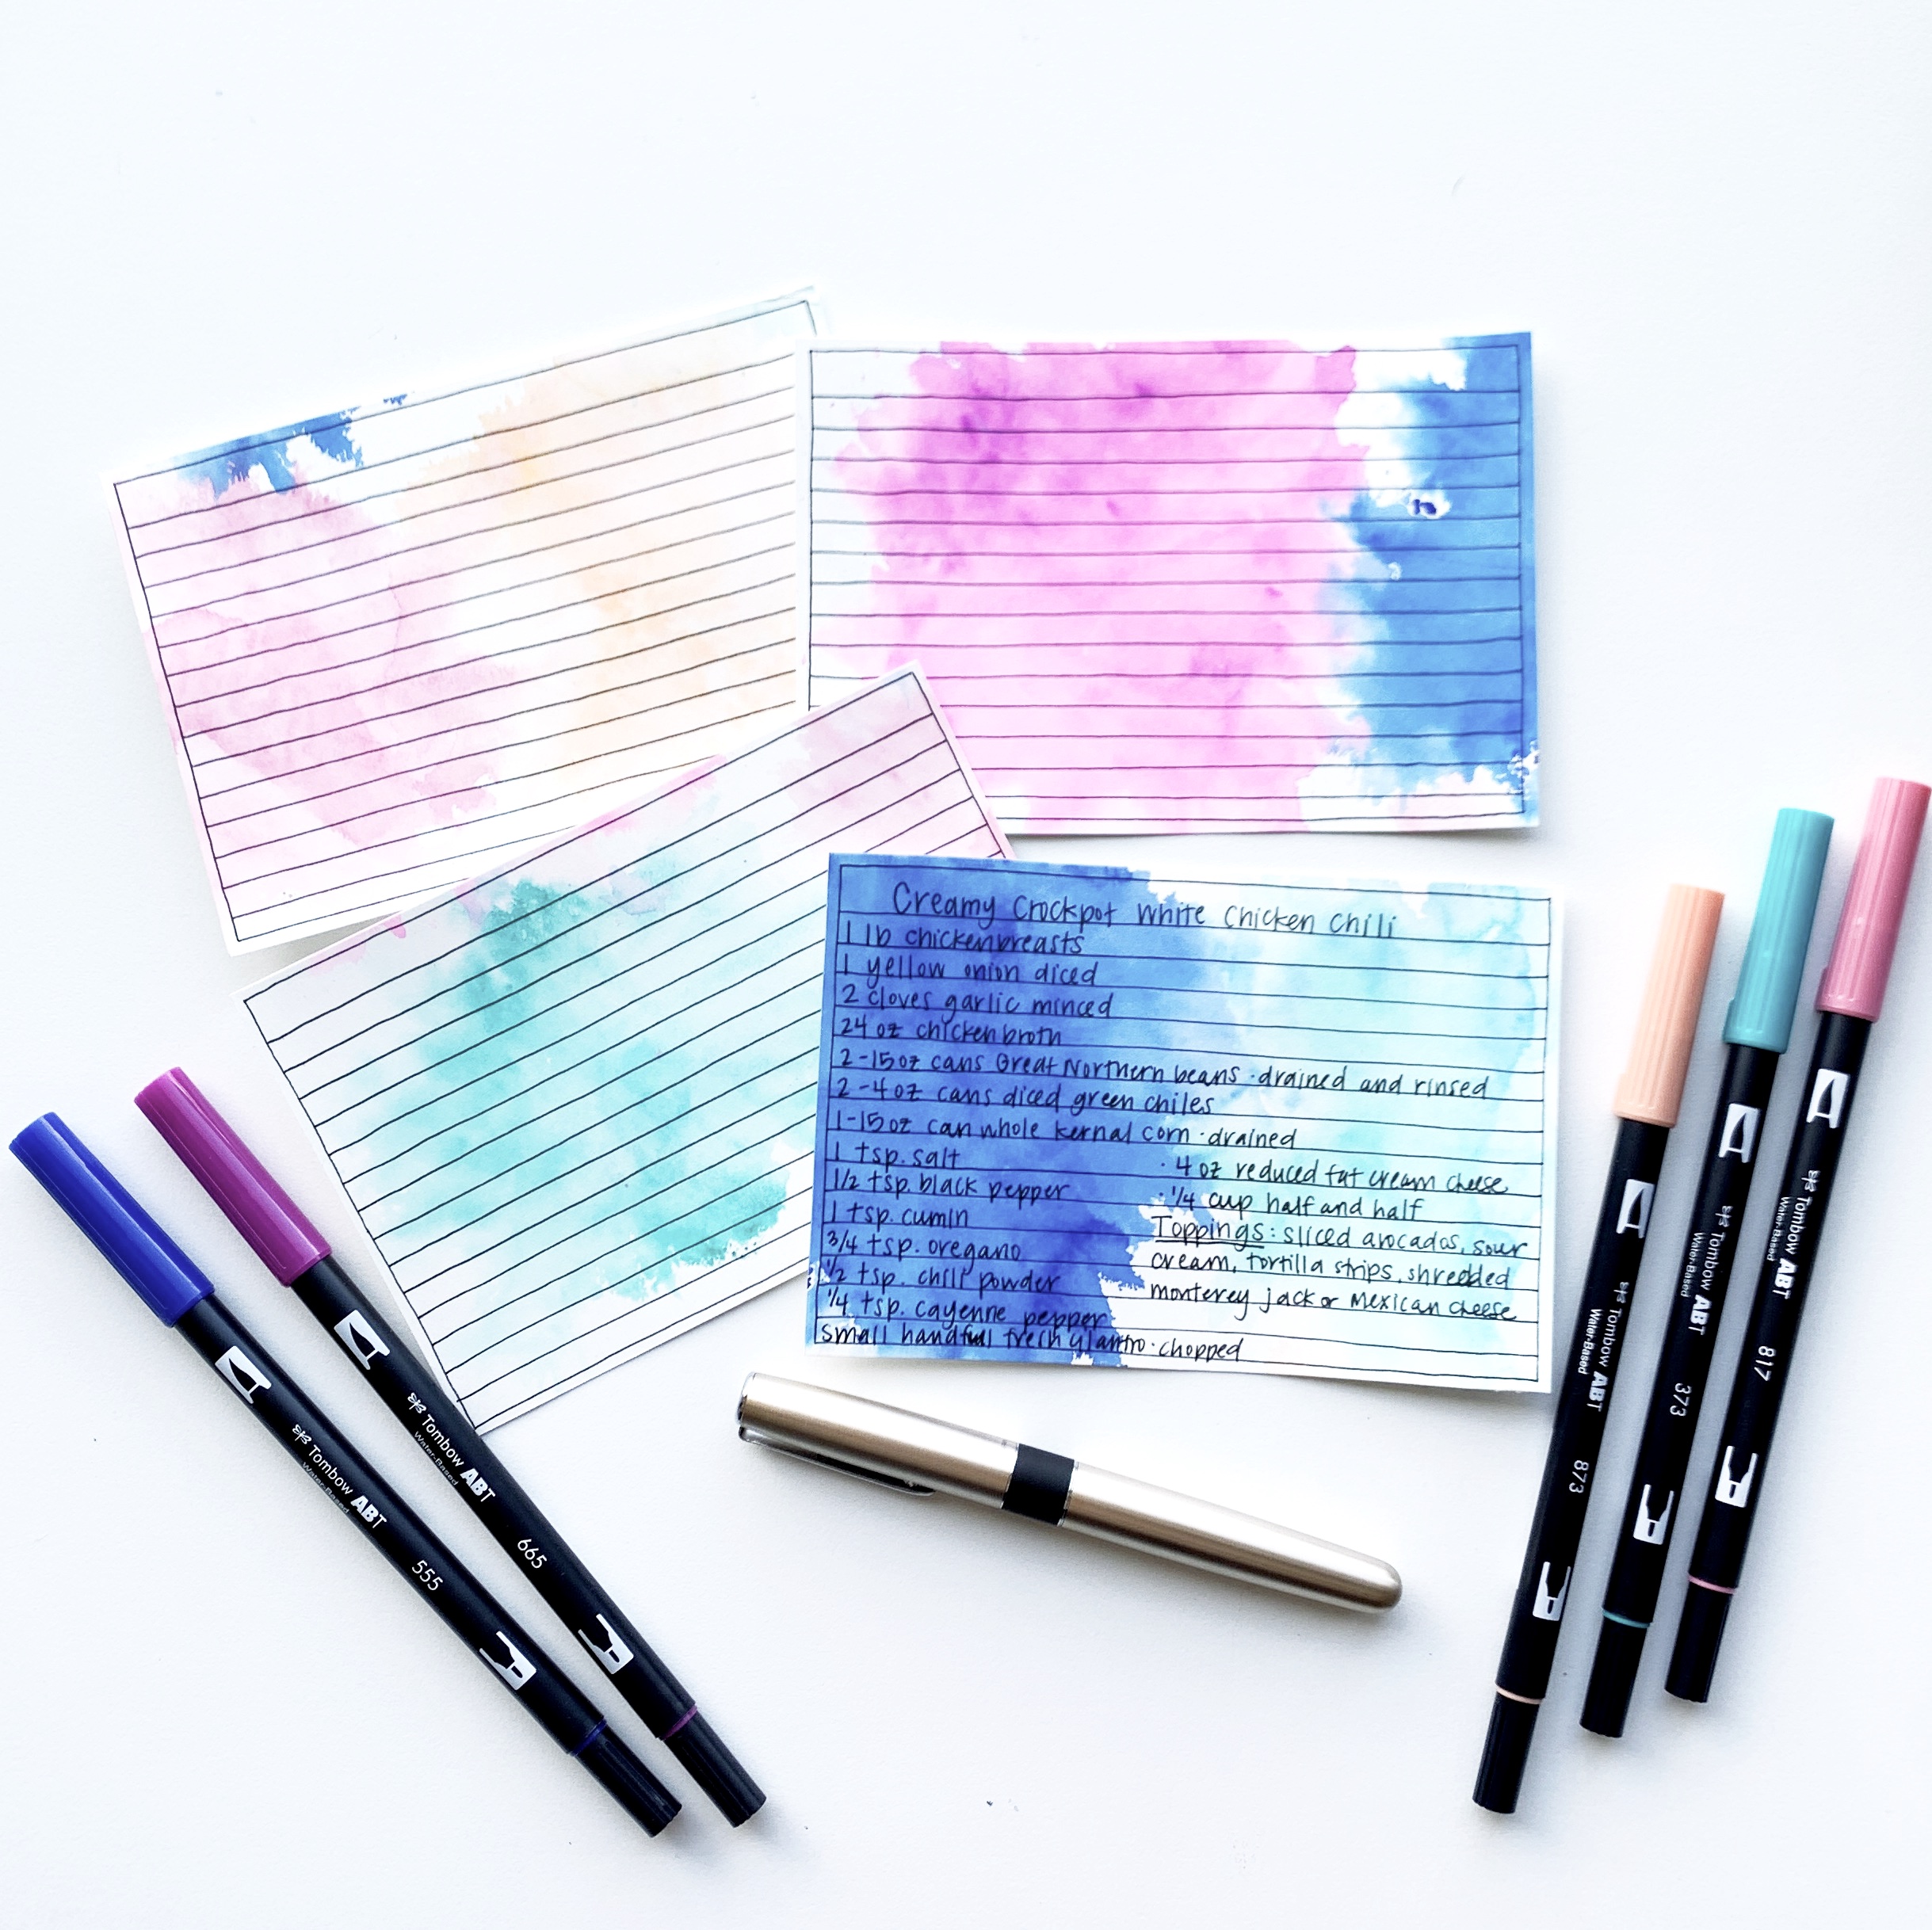 Learn how to create easy watercolor recipe cards with Adrienne from @studio80design!